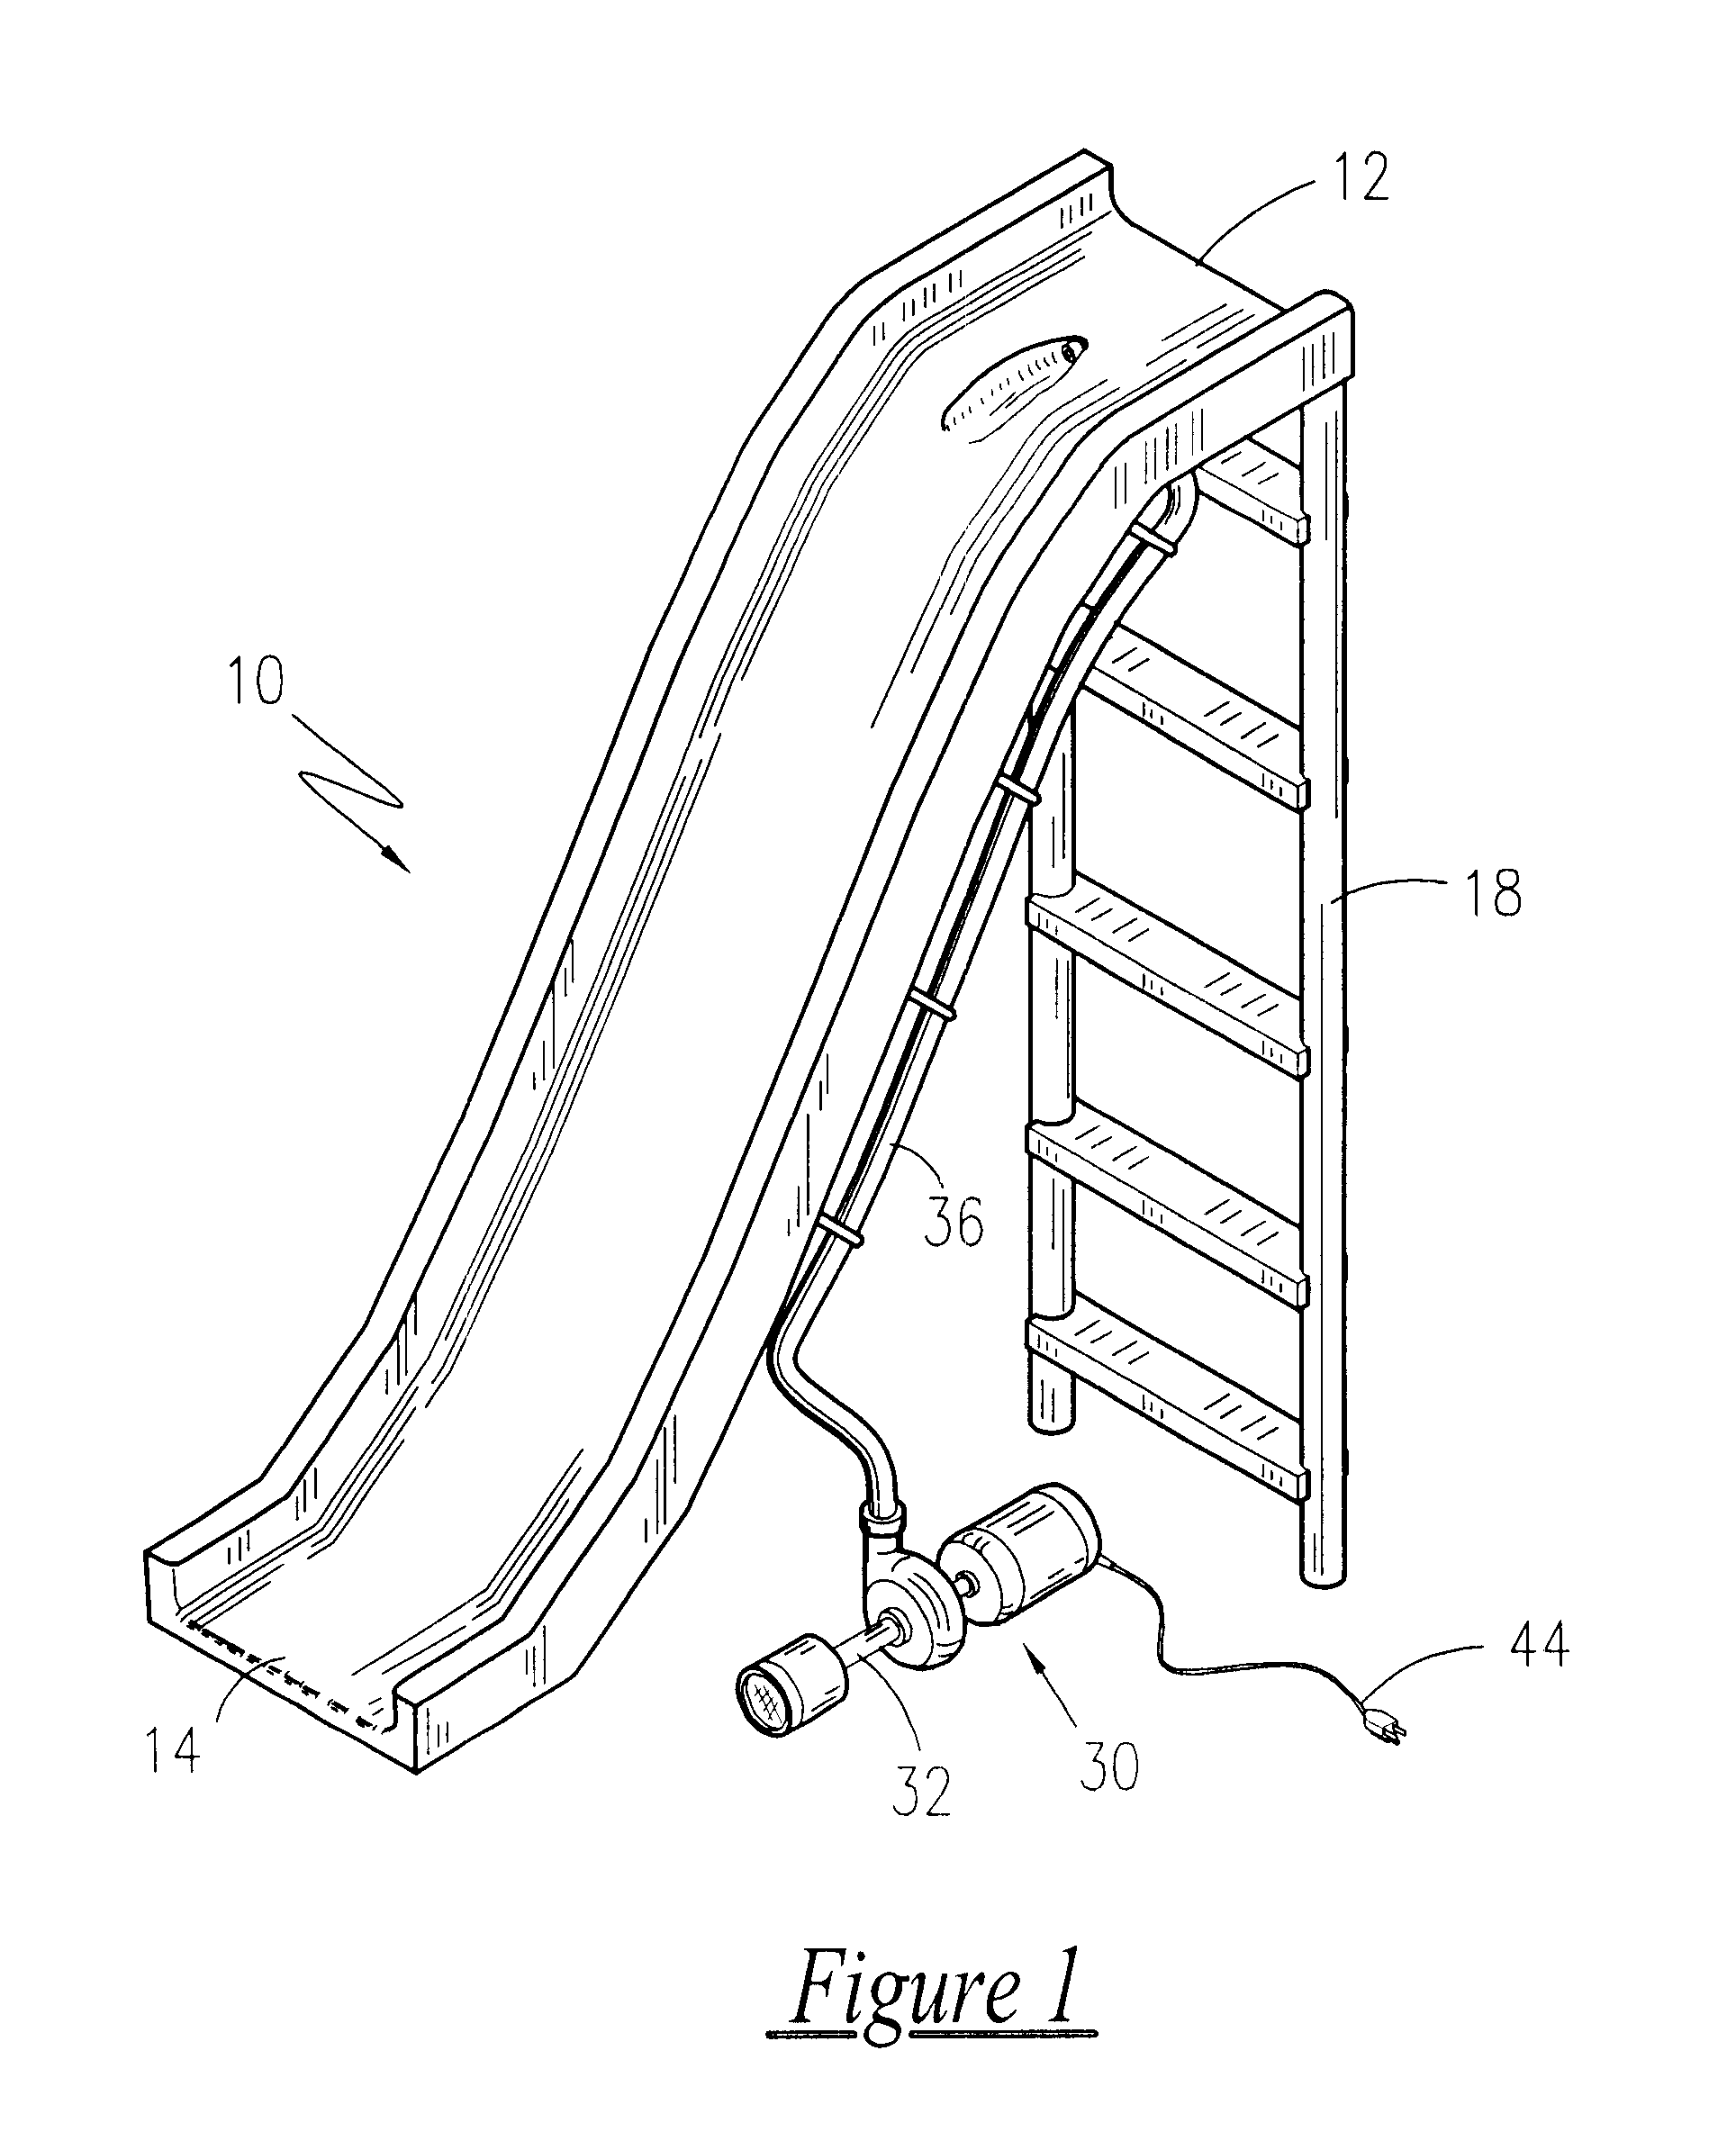 Self contained water slide for individual yard use